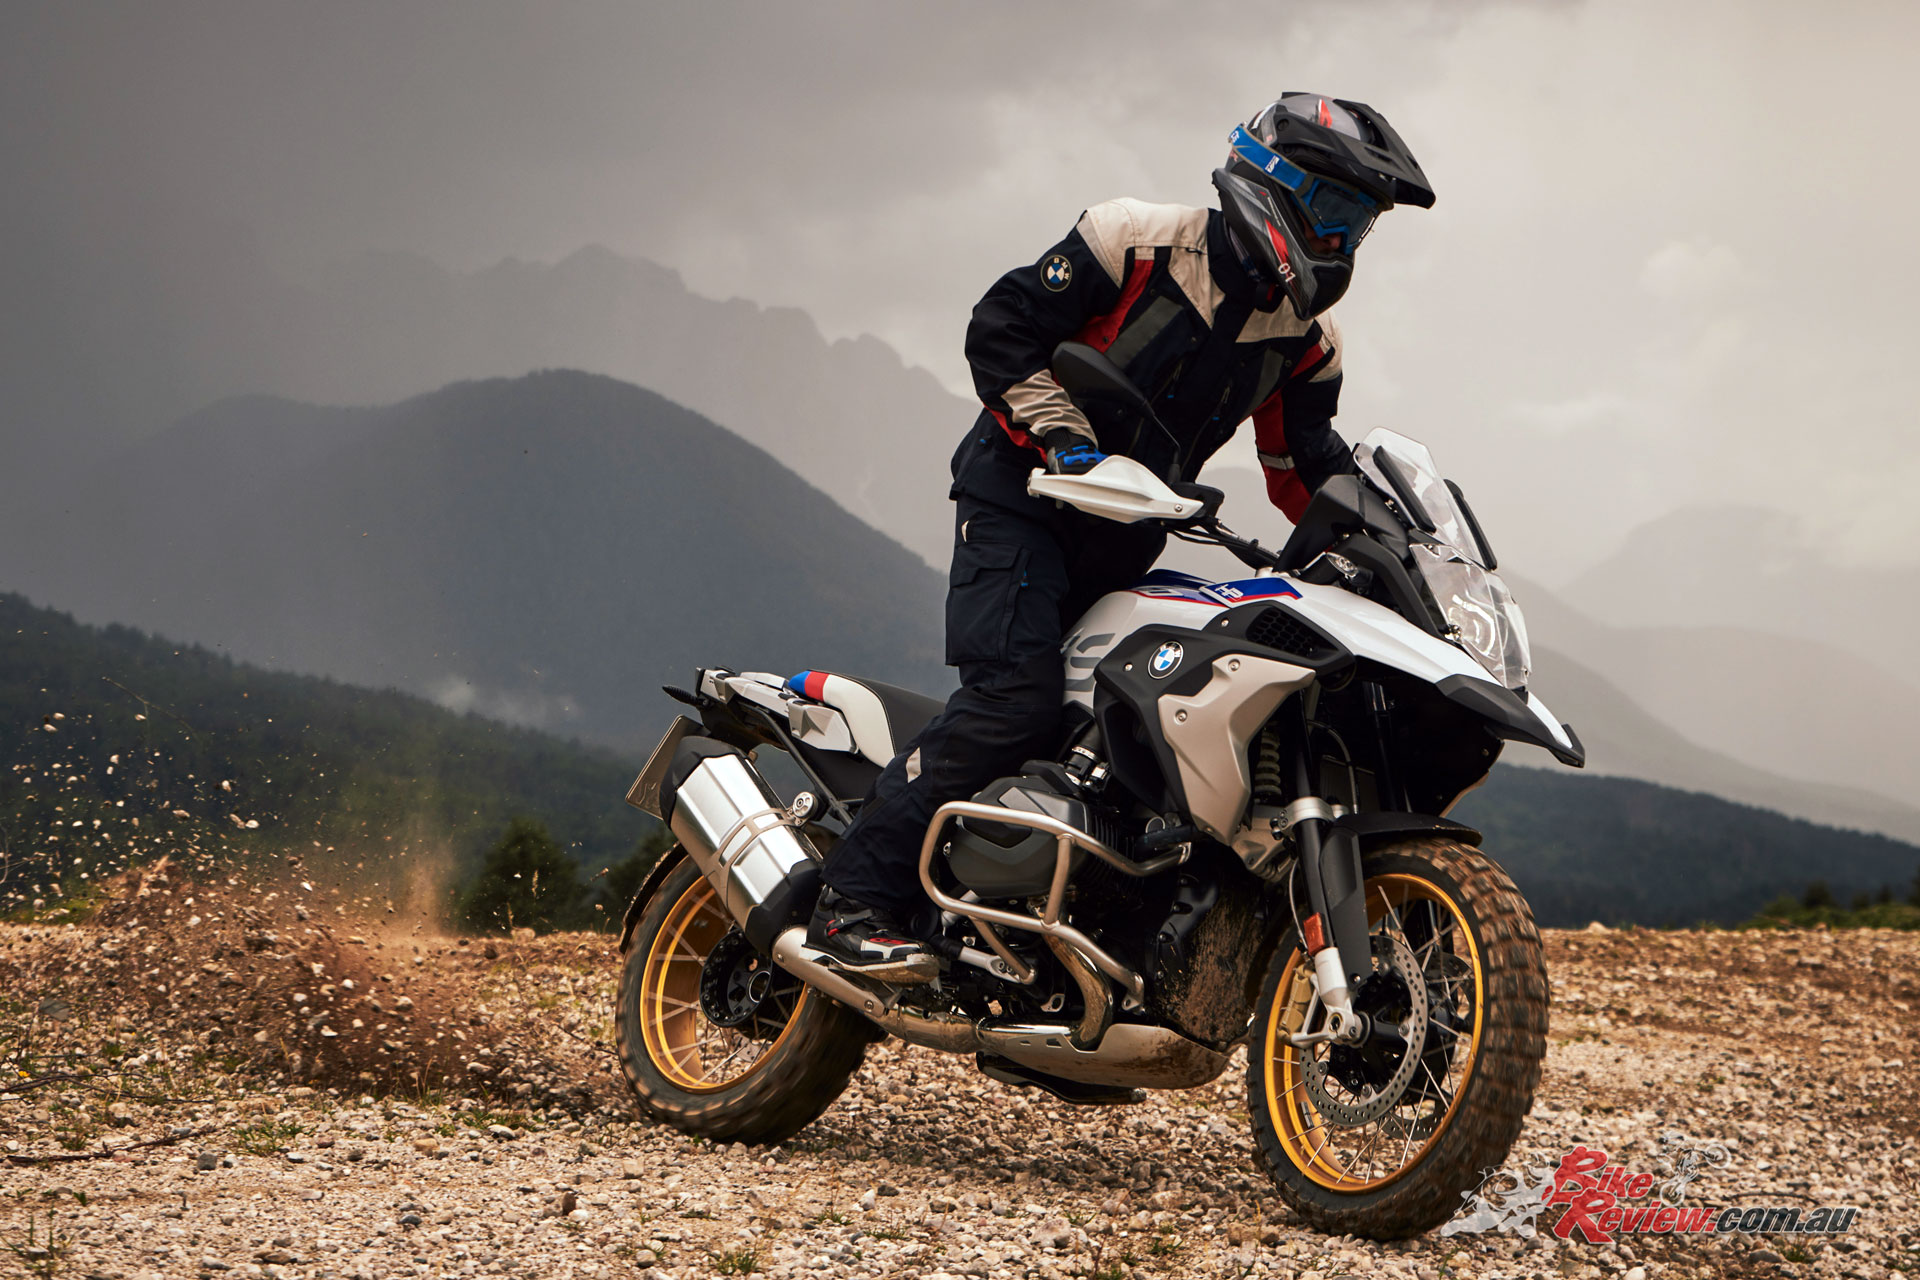 New Model 2019 BMW R 1250 GS & R 1250 RT Bike Review